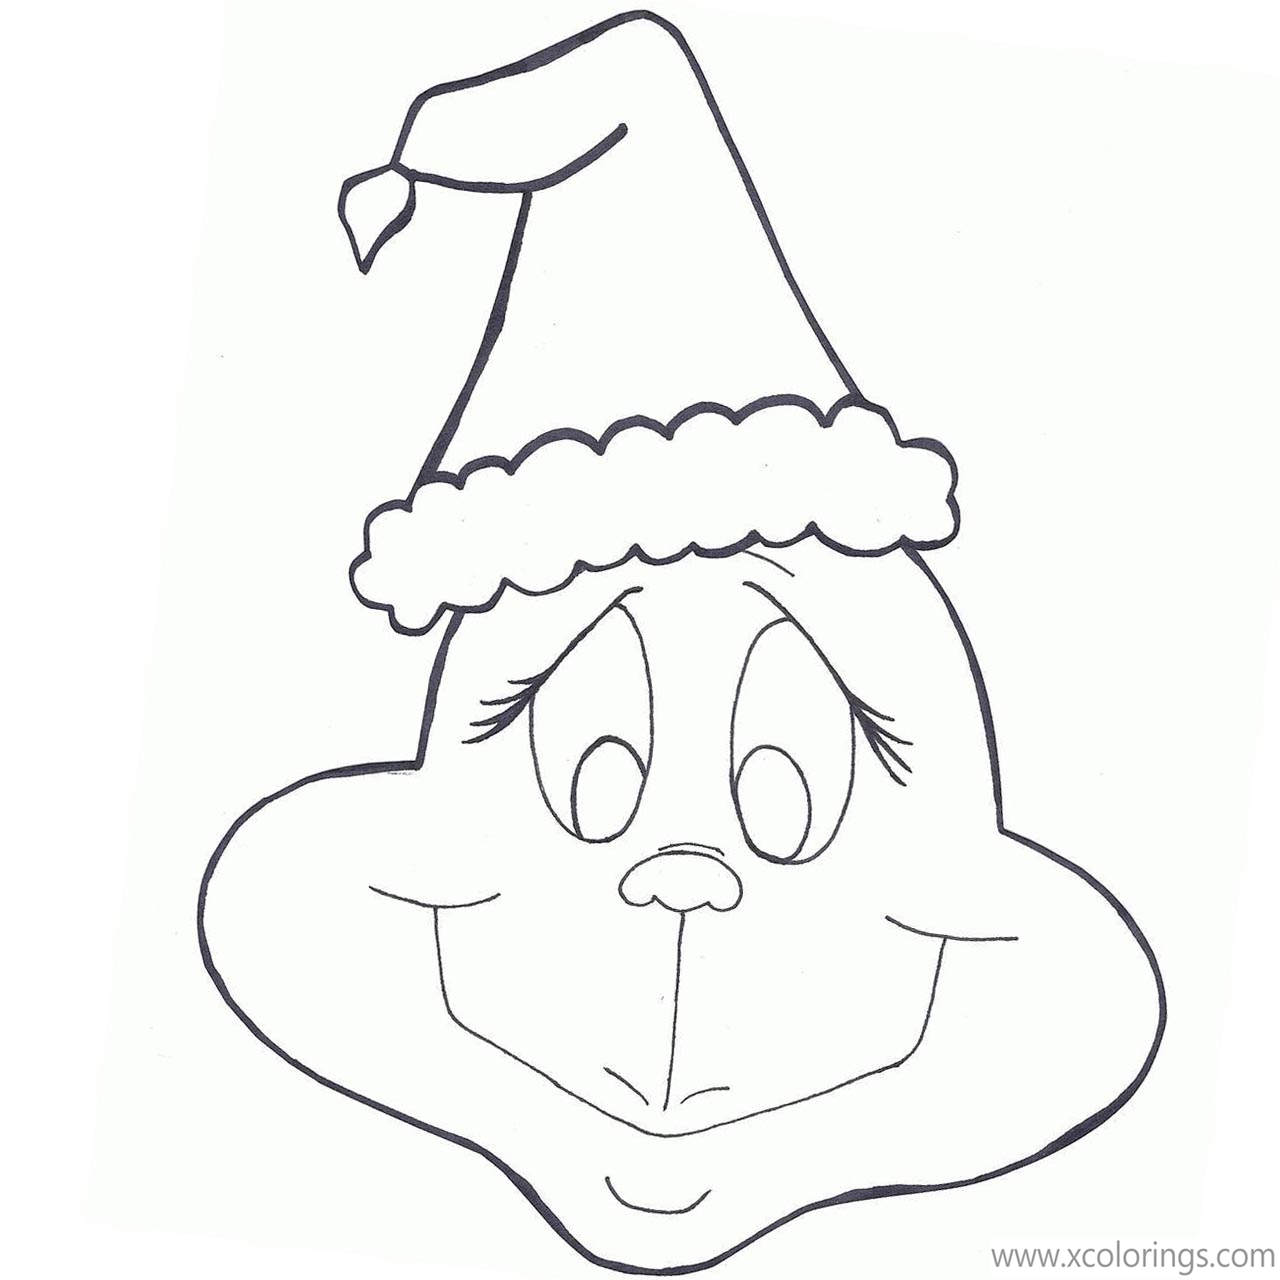 Face of Grinch Coloring Pages - XColorings.com